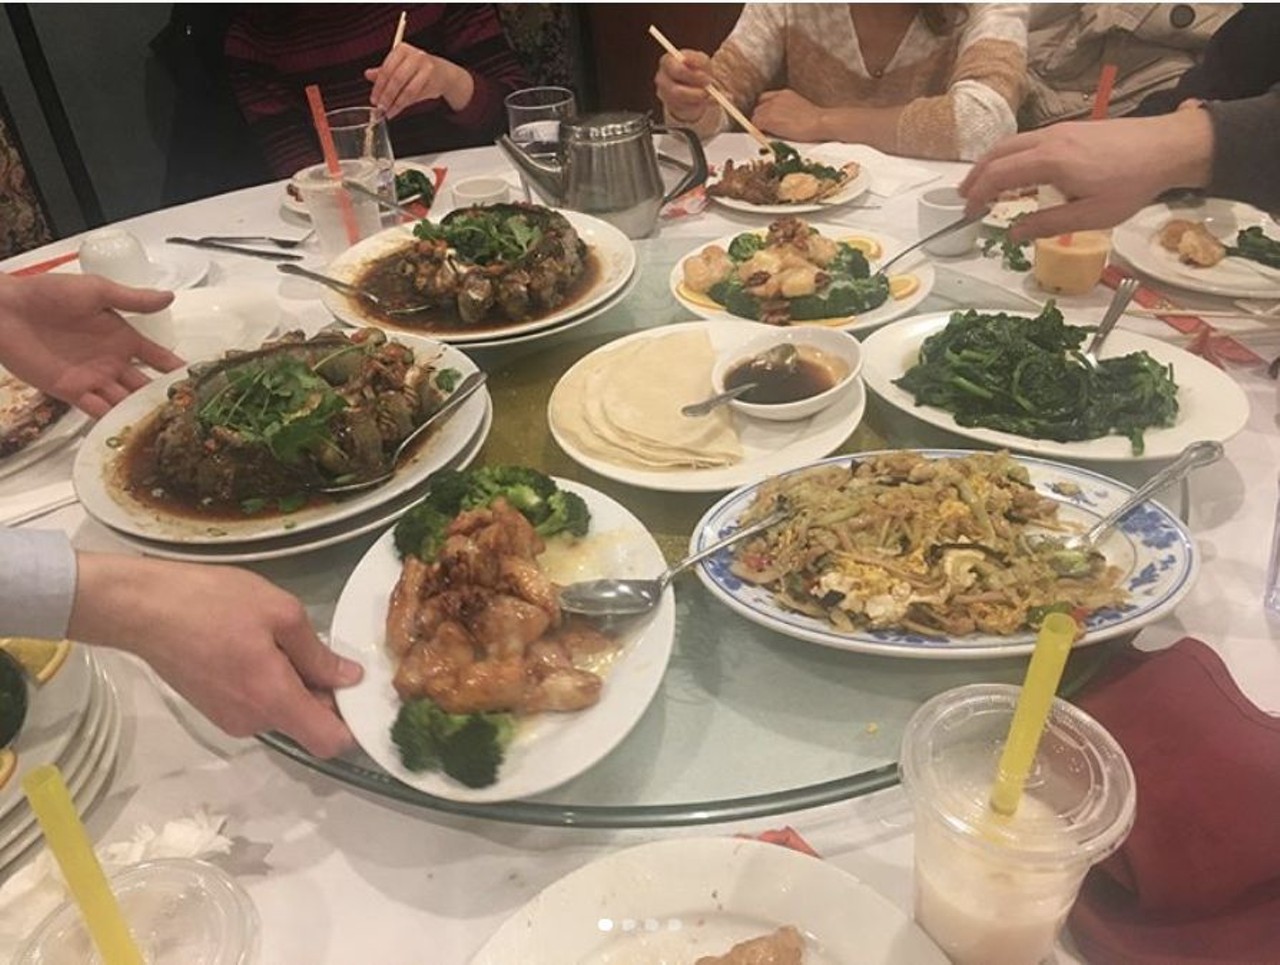  MotivAsians Lunar New Year Dinner
2999 Payne Ave., Feb. 18, 5:30 p.m.-8:30 p.m.
At $30 per person, MotivAsians is holding its annual Chinese New Year dinner at a major discount. With food from Li Wah, highlights of this 10-course meal include house pan fried noodles, pan seared flounder with ginger and scallions and double lobster with ginger scallion sauce.
Photo via  glitterhoopjunkie/Instagram